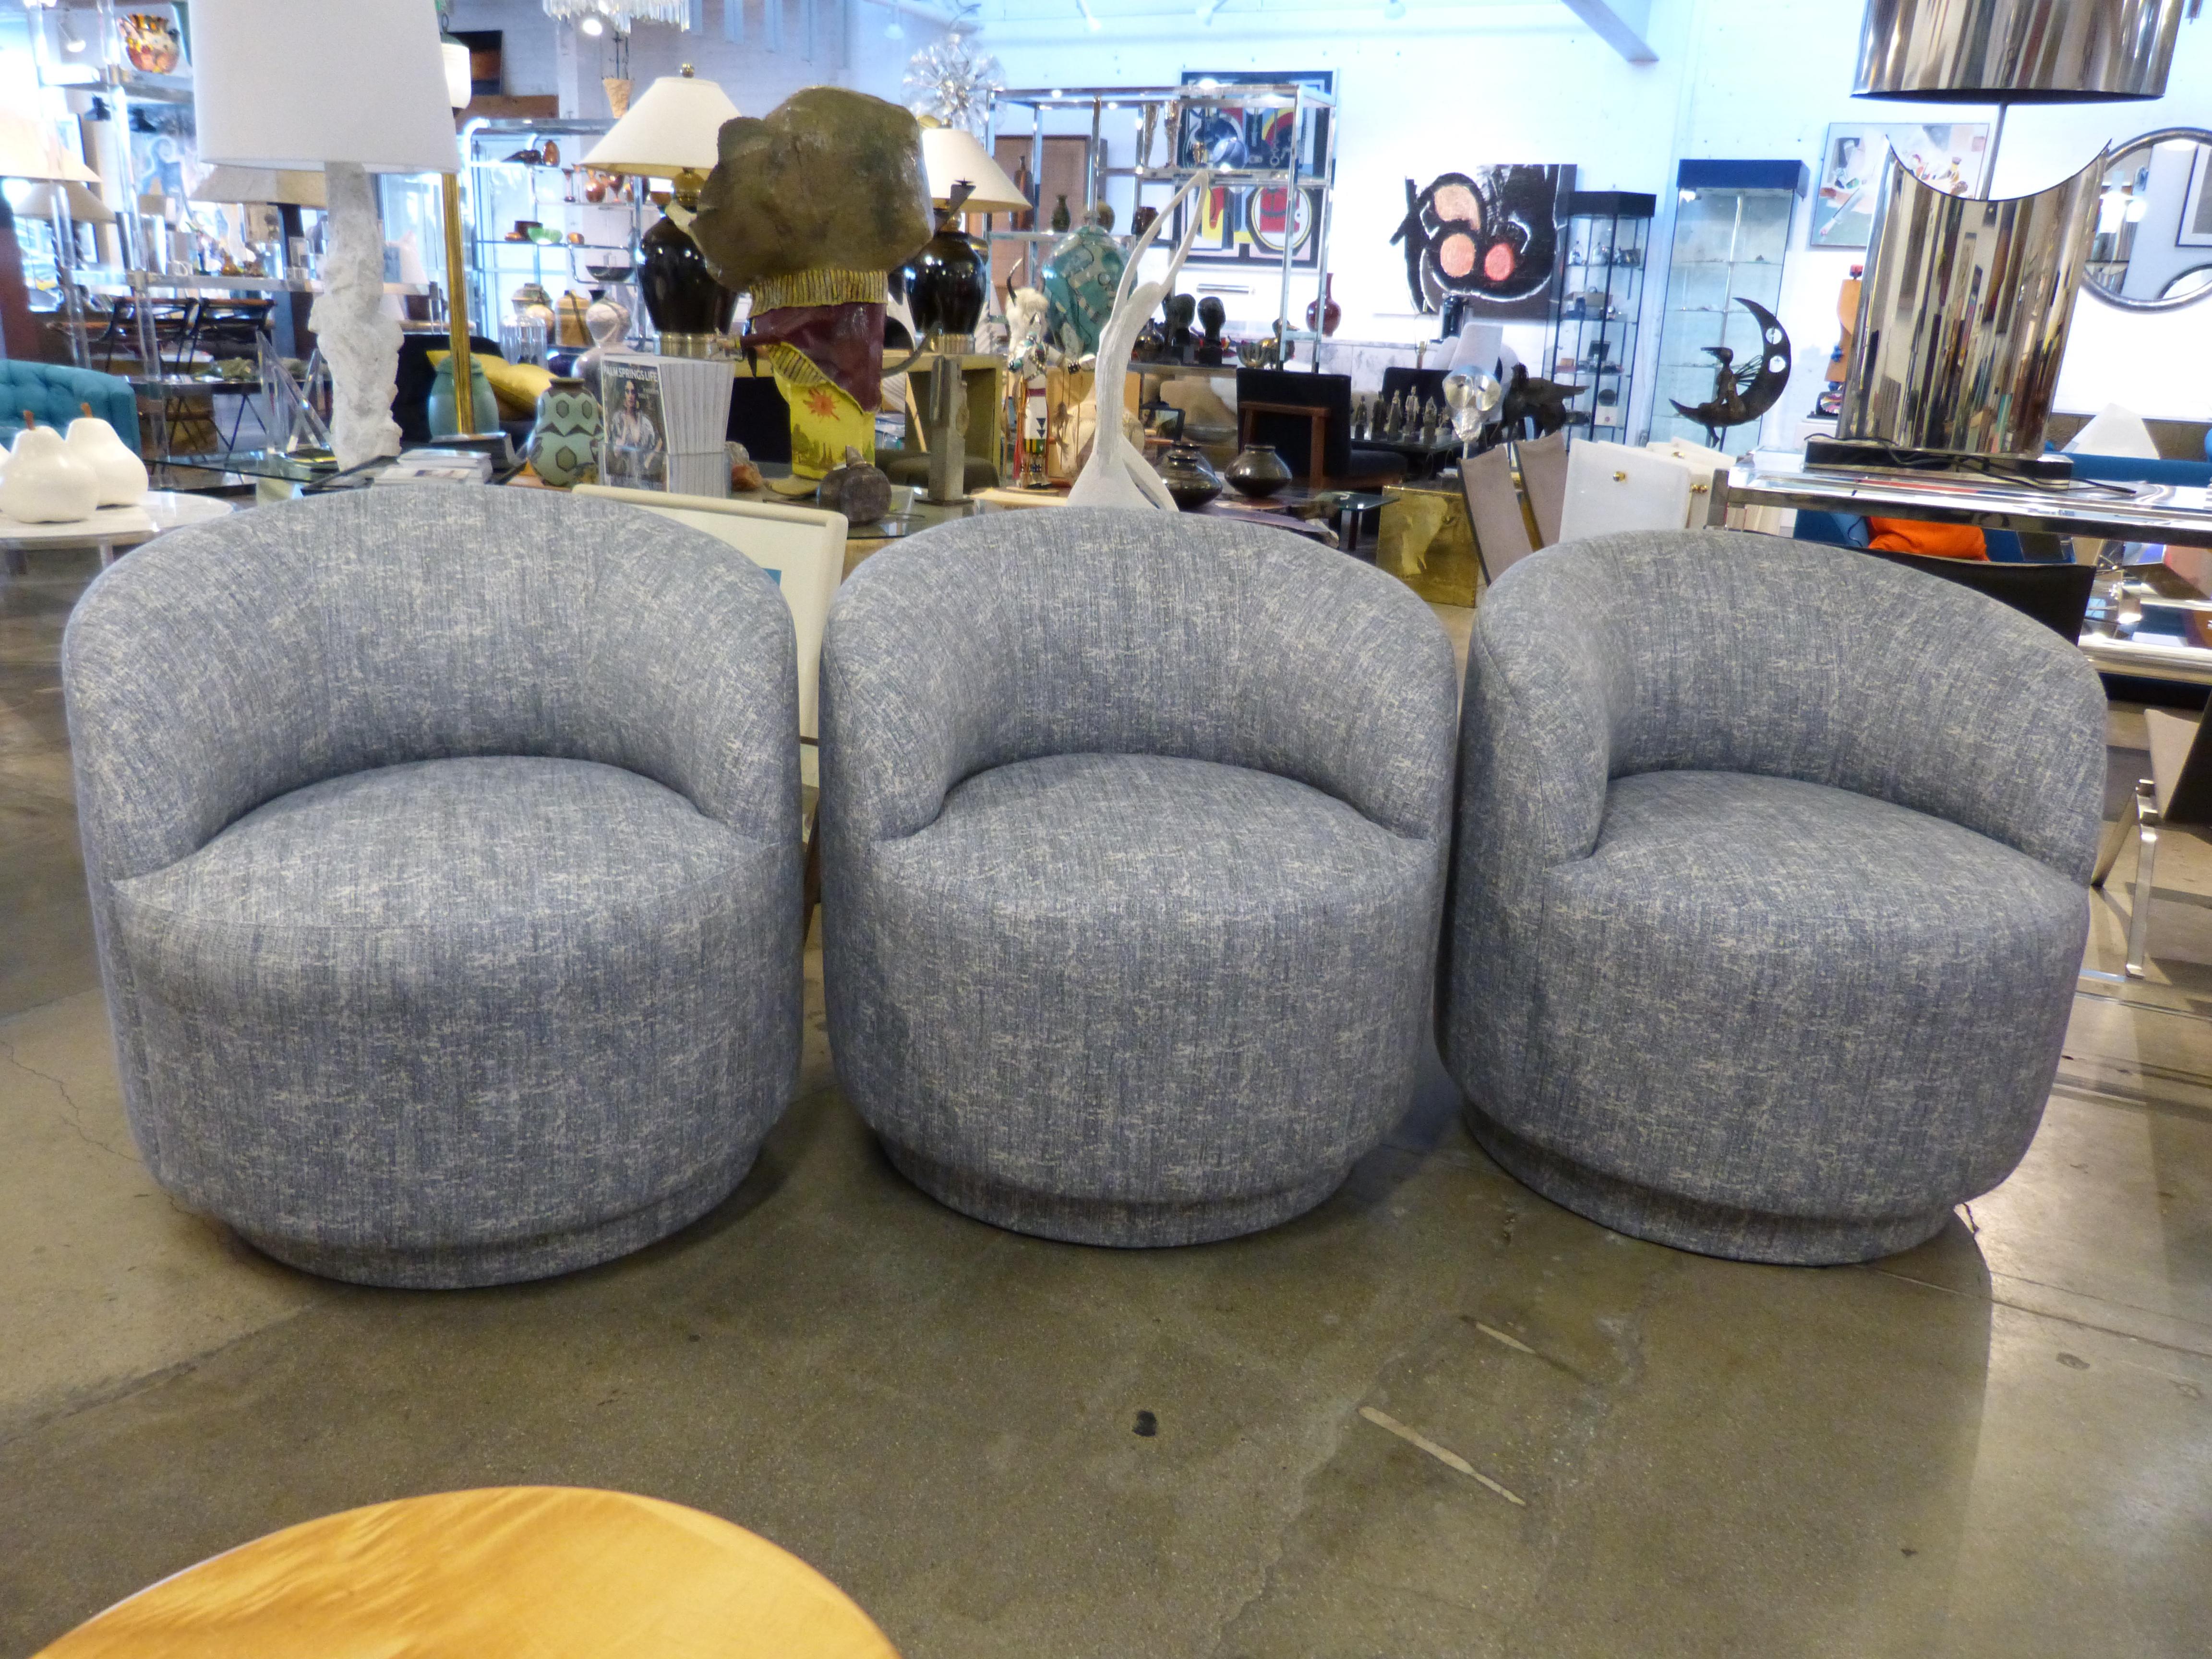 Machine-Made Set of 3 Upholstered Chairs on Platforms